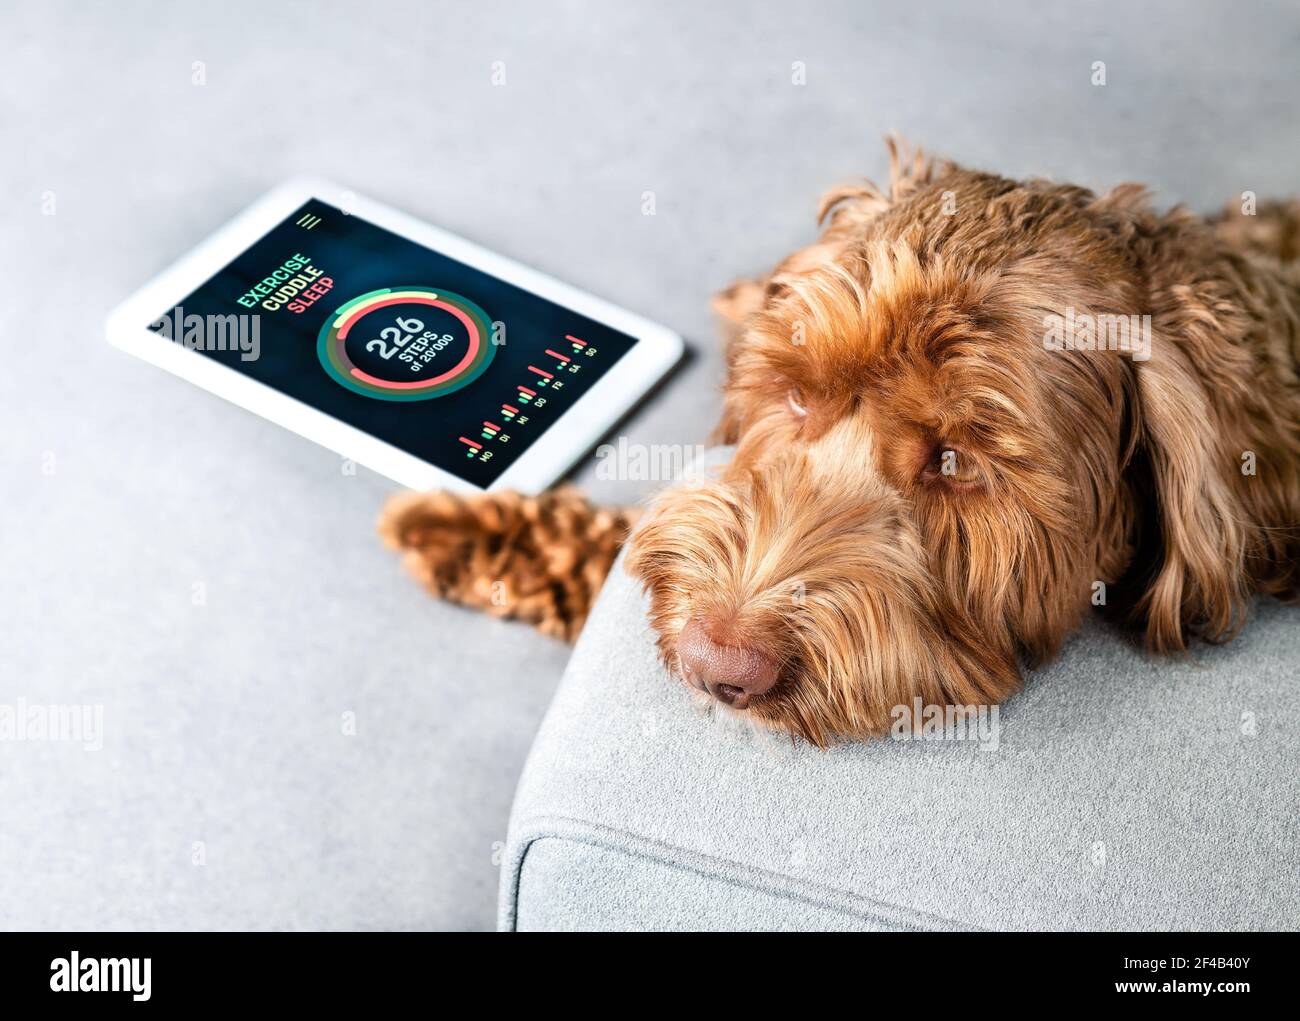 Labradoodle dog with fitness app screen on tablet. Pet themed activity or cardio tracking application concept. Sad dog demeanor. Stock Photo